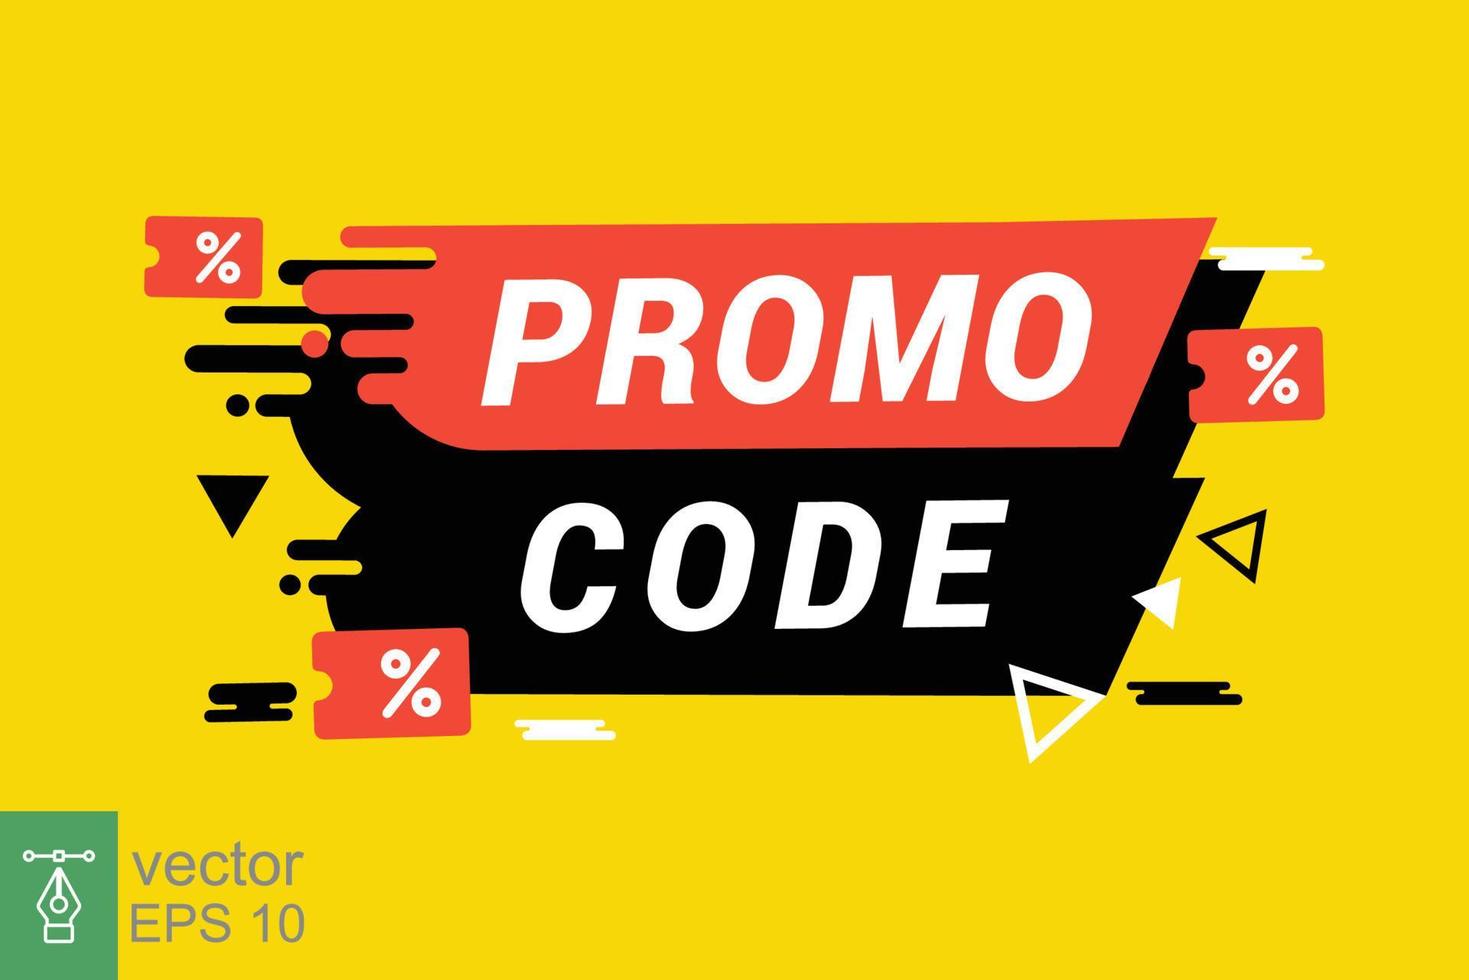 Promo code, coupon code. Discount vouchers, online shop, redeem, sale concept. Simple flat style. Vector design illustration on yellow background. EPS 10.